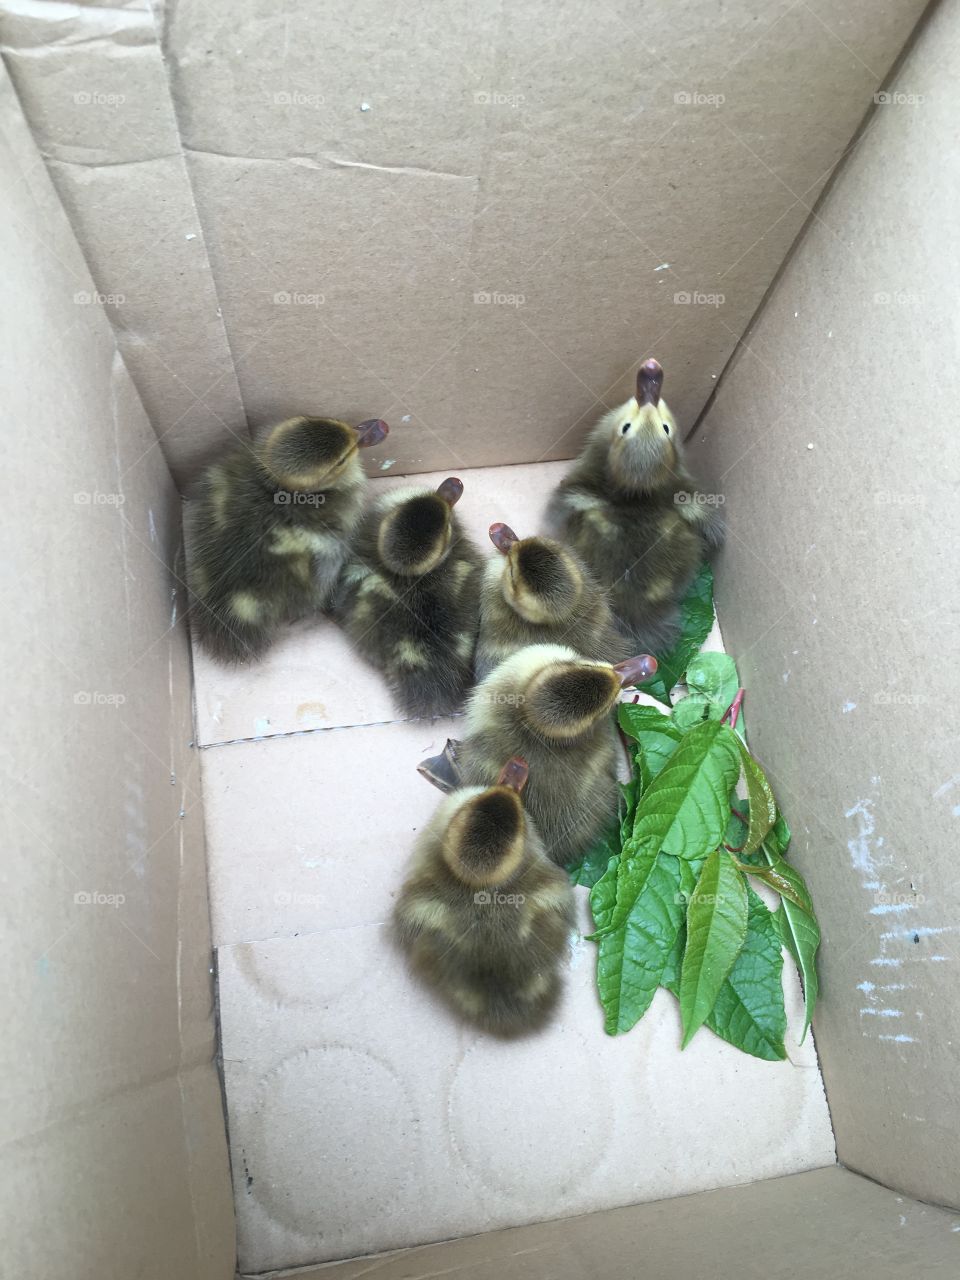 Ducklings in a box rescued from a dog that killed their mother! Sooo cute 